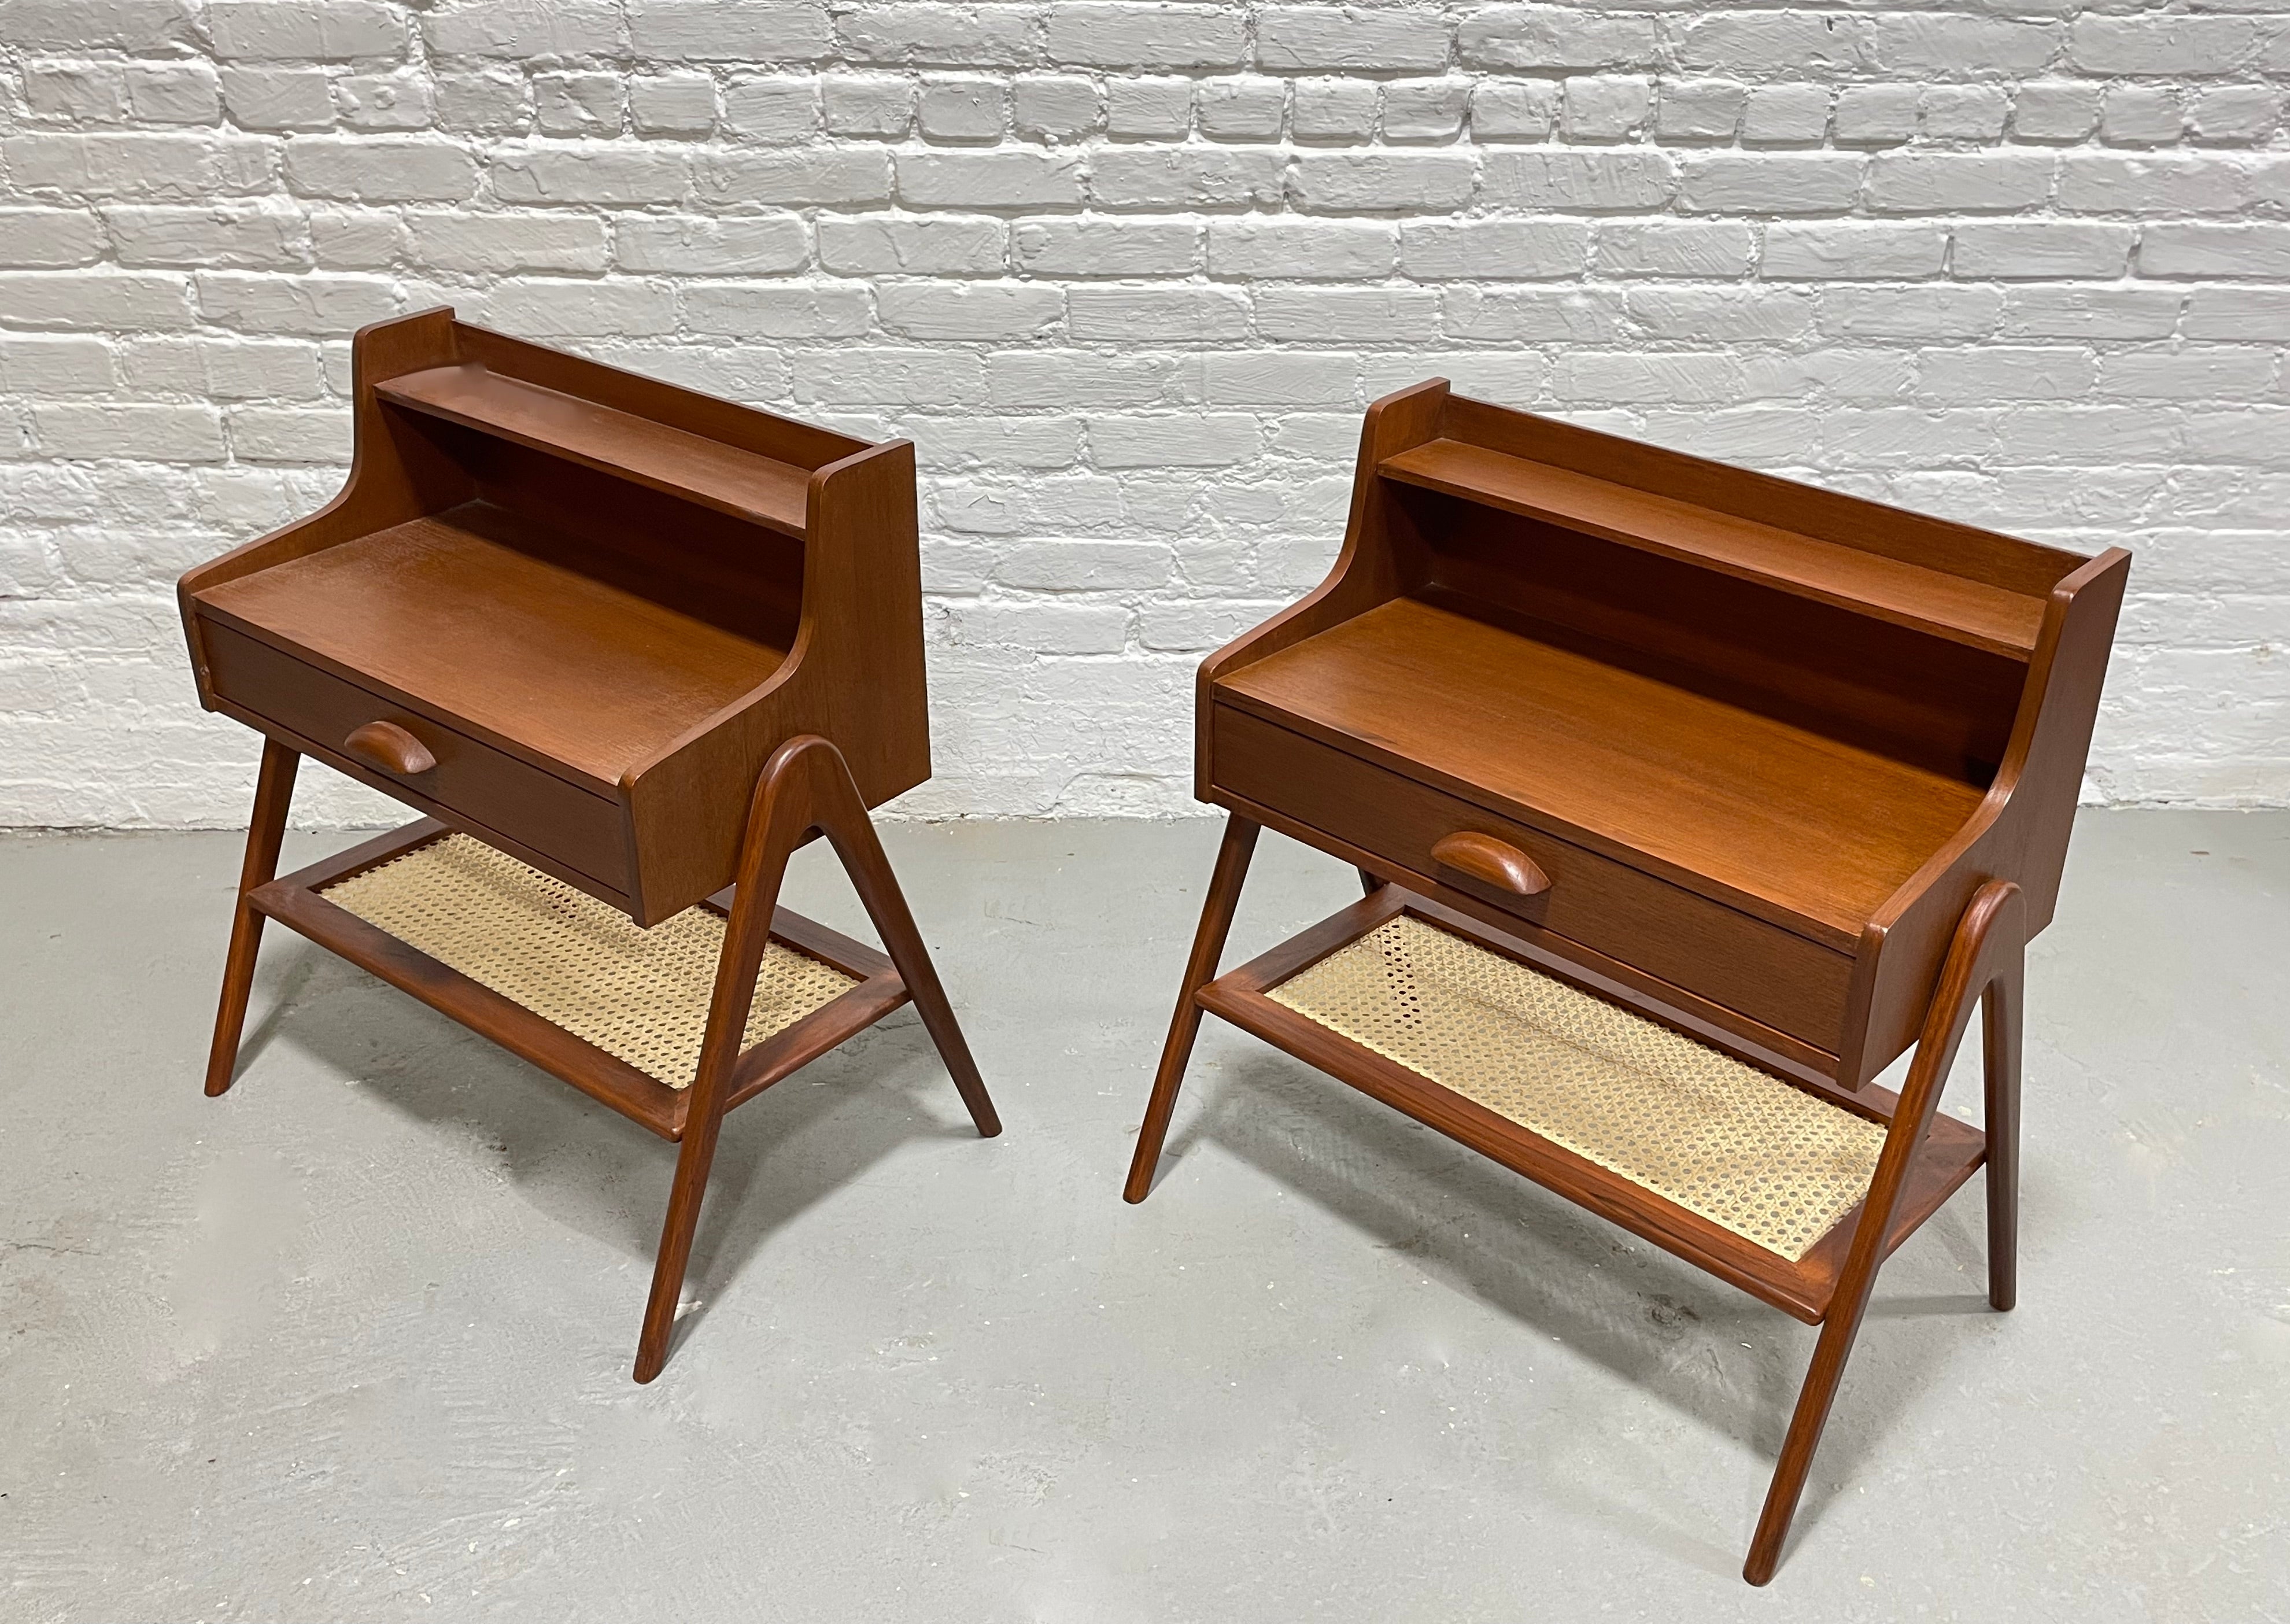 Pair of Mid Century MODERN Handcrafted Caned TEAK CABINETS / Entryway Tables